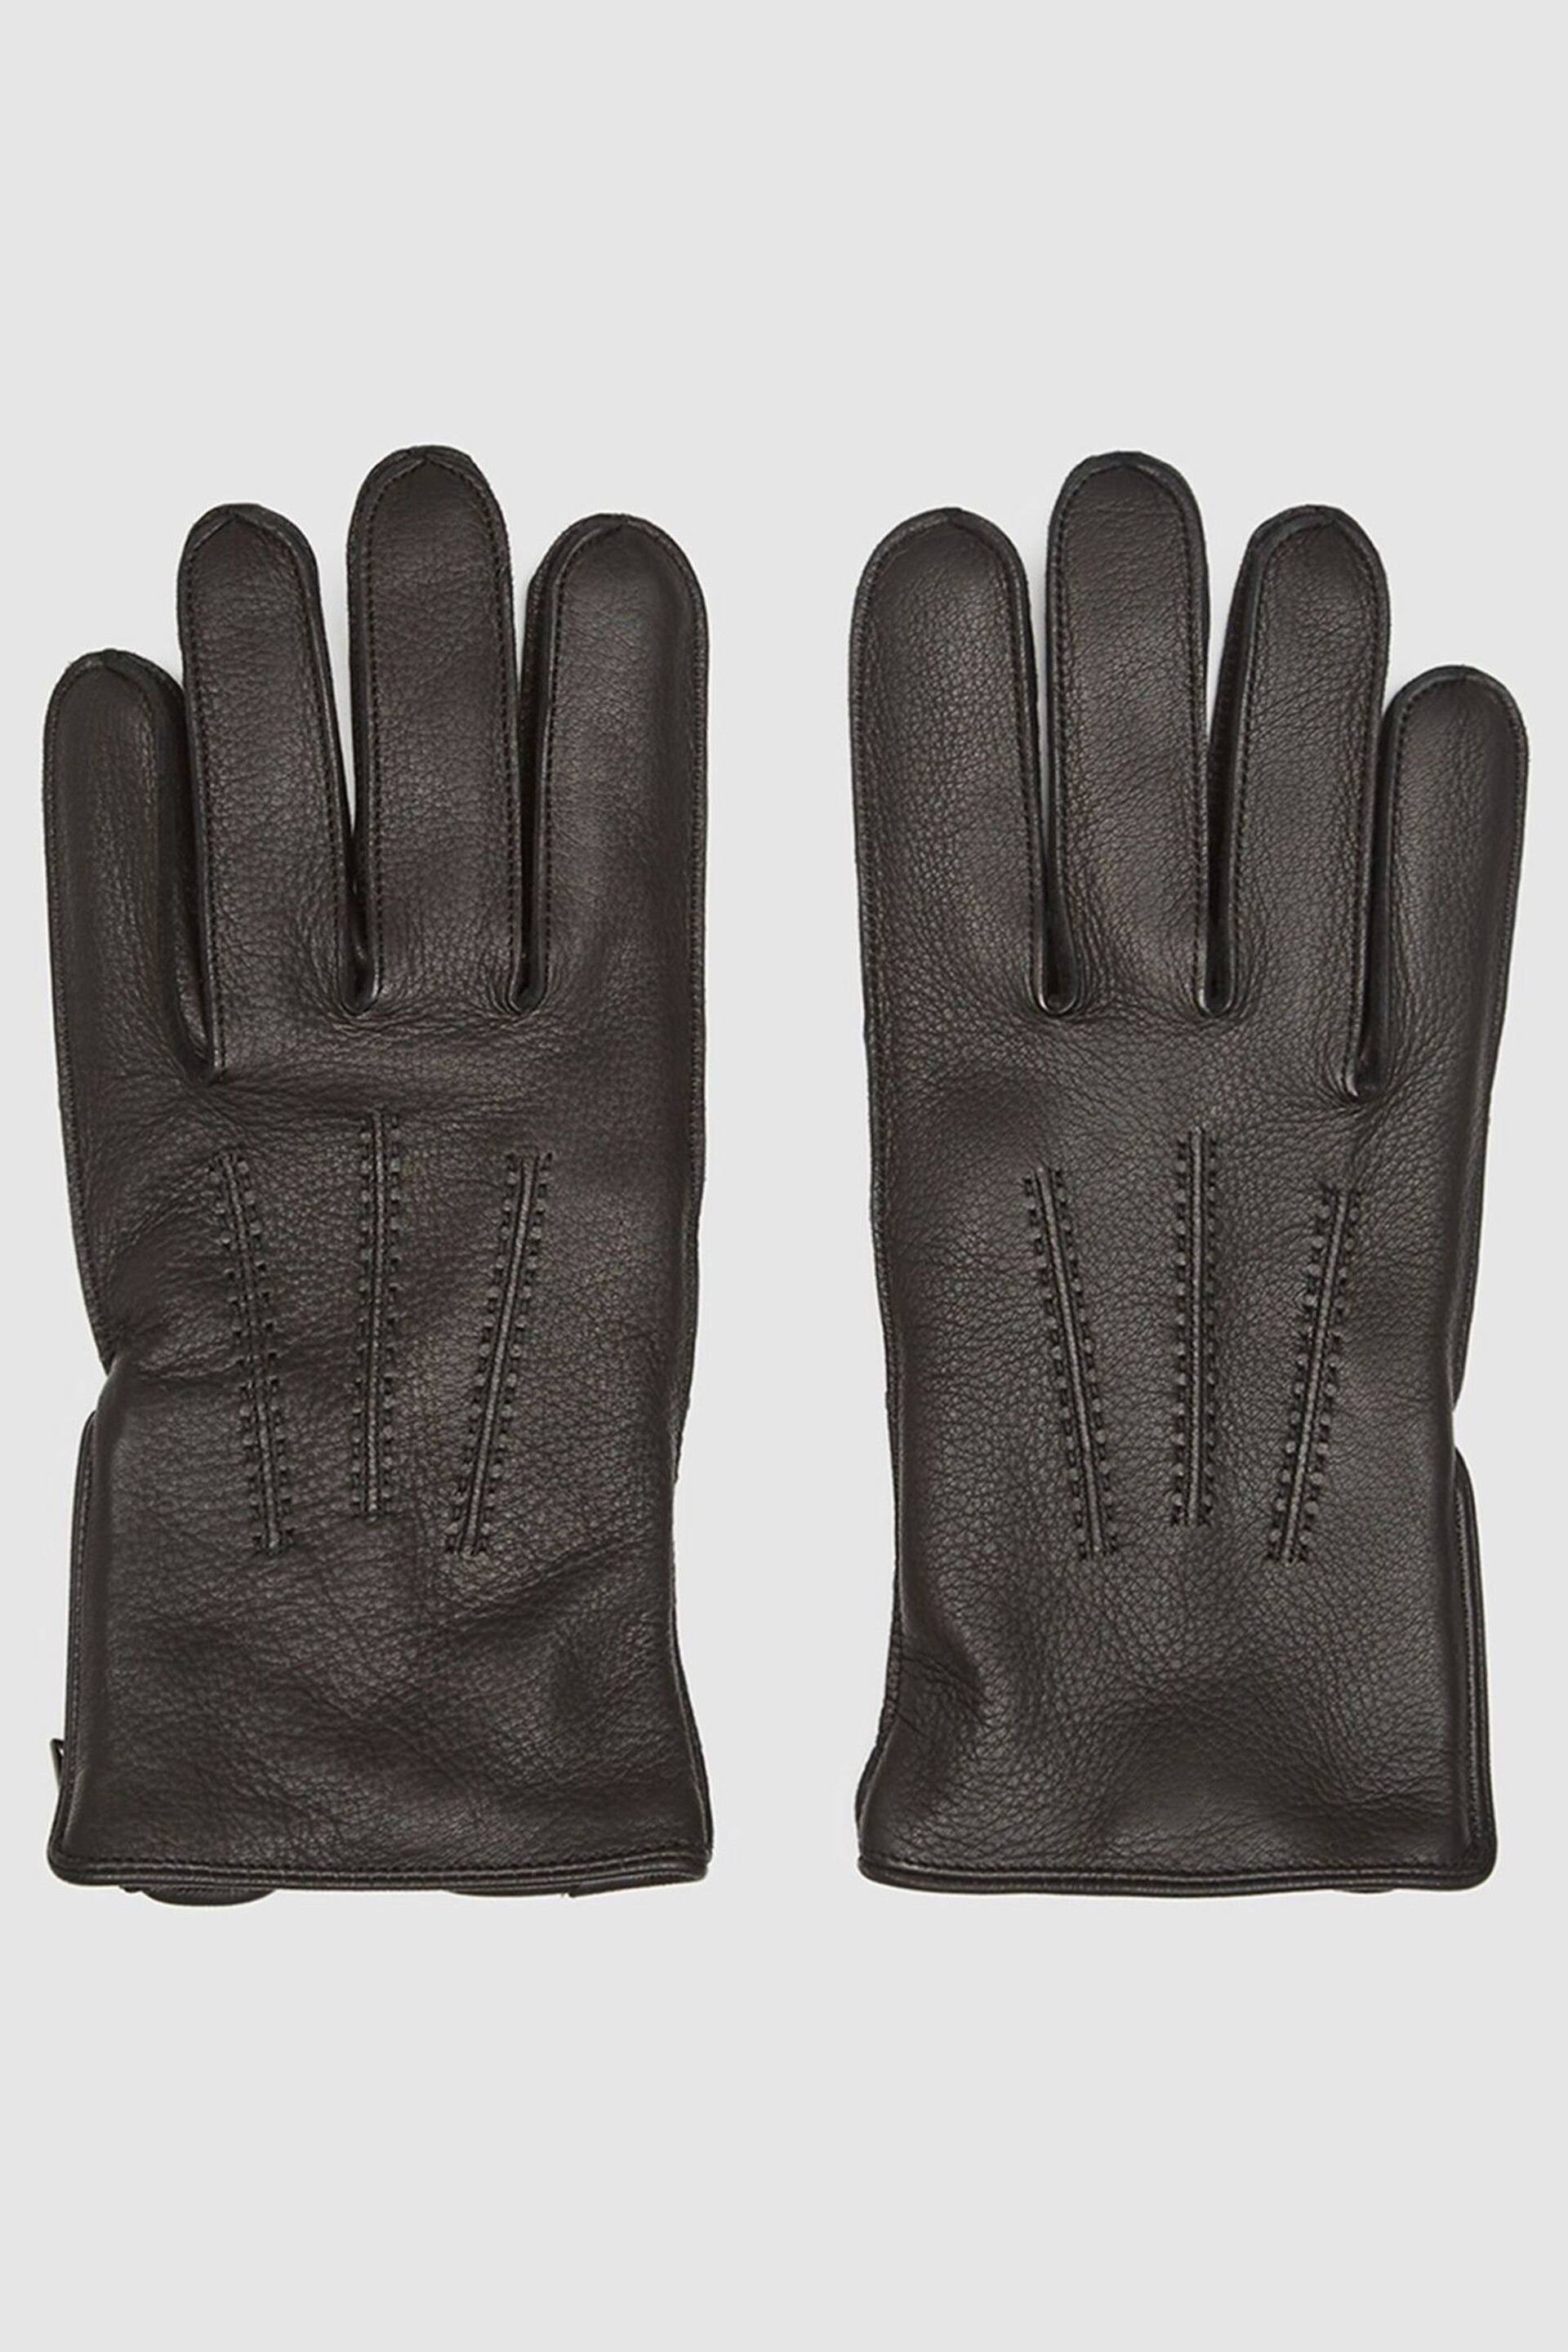 Reiss Black Iowa Leather Gloves - Image 1 of 4